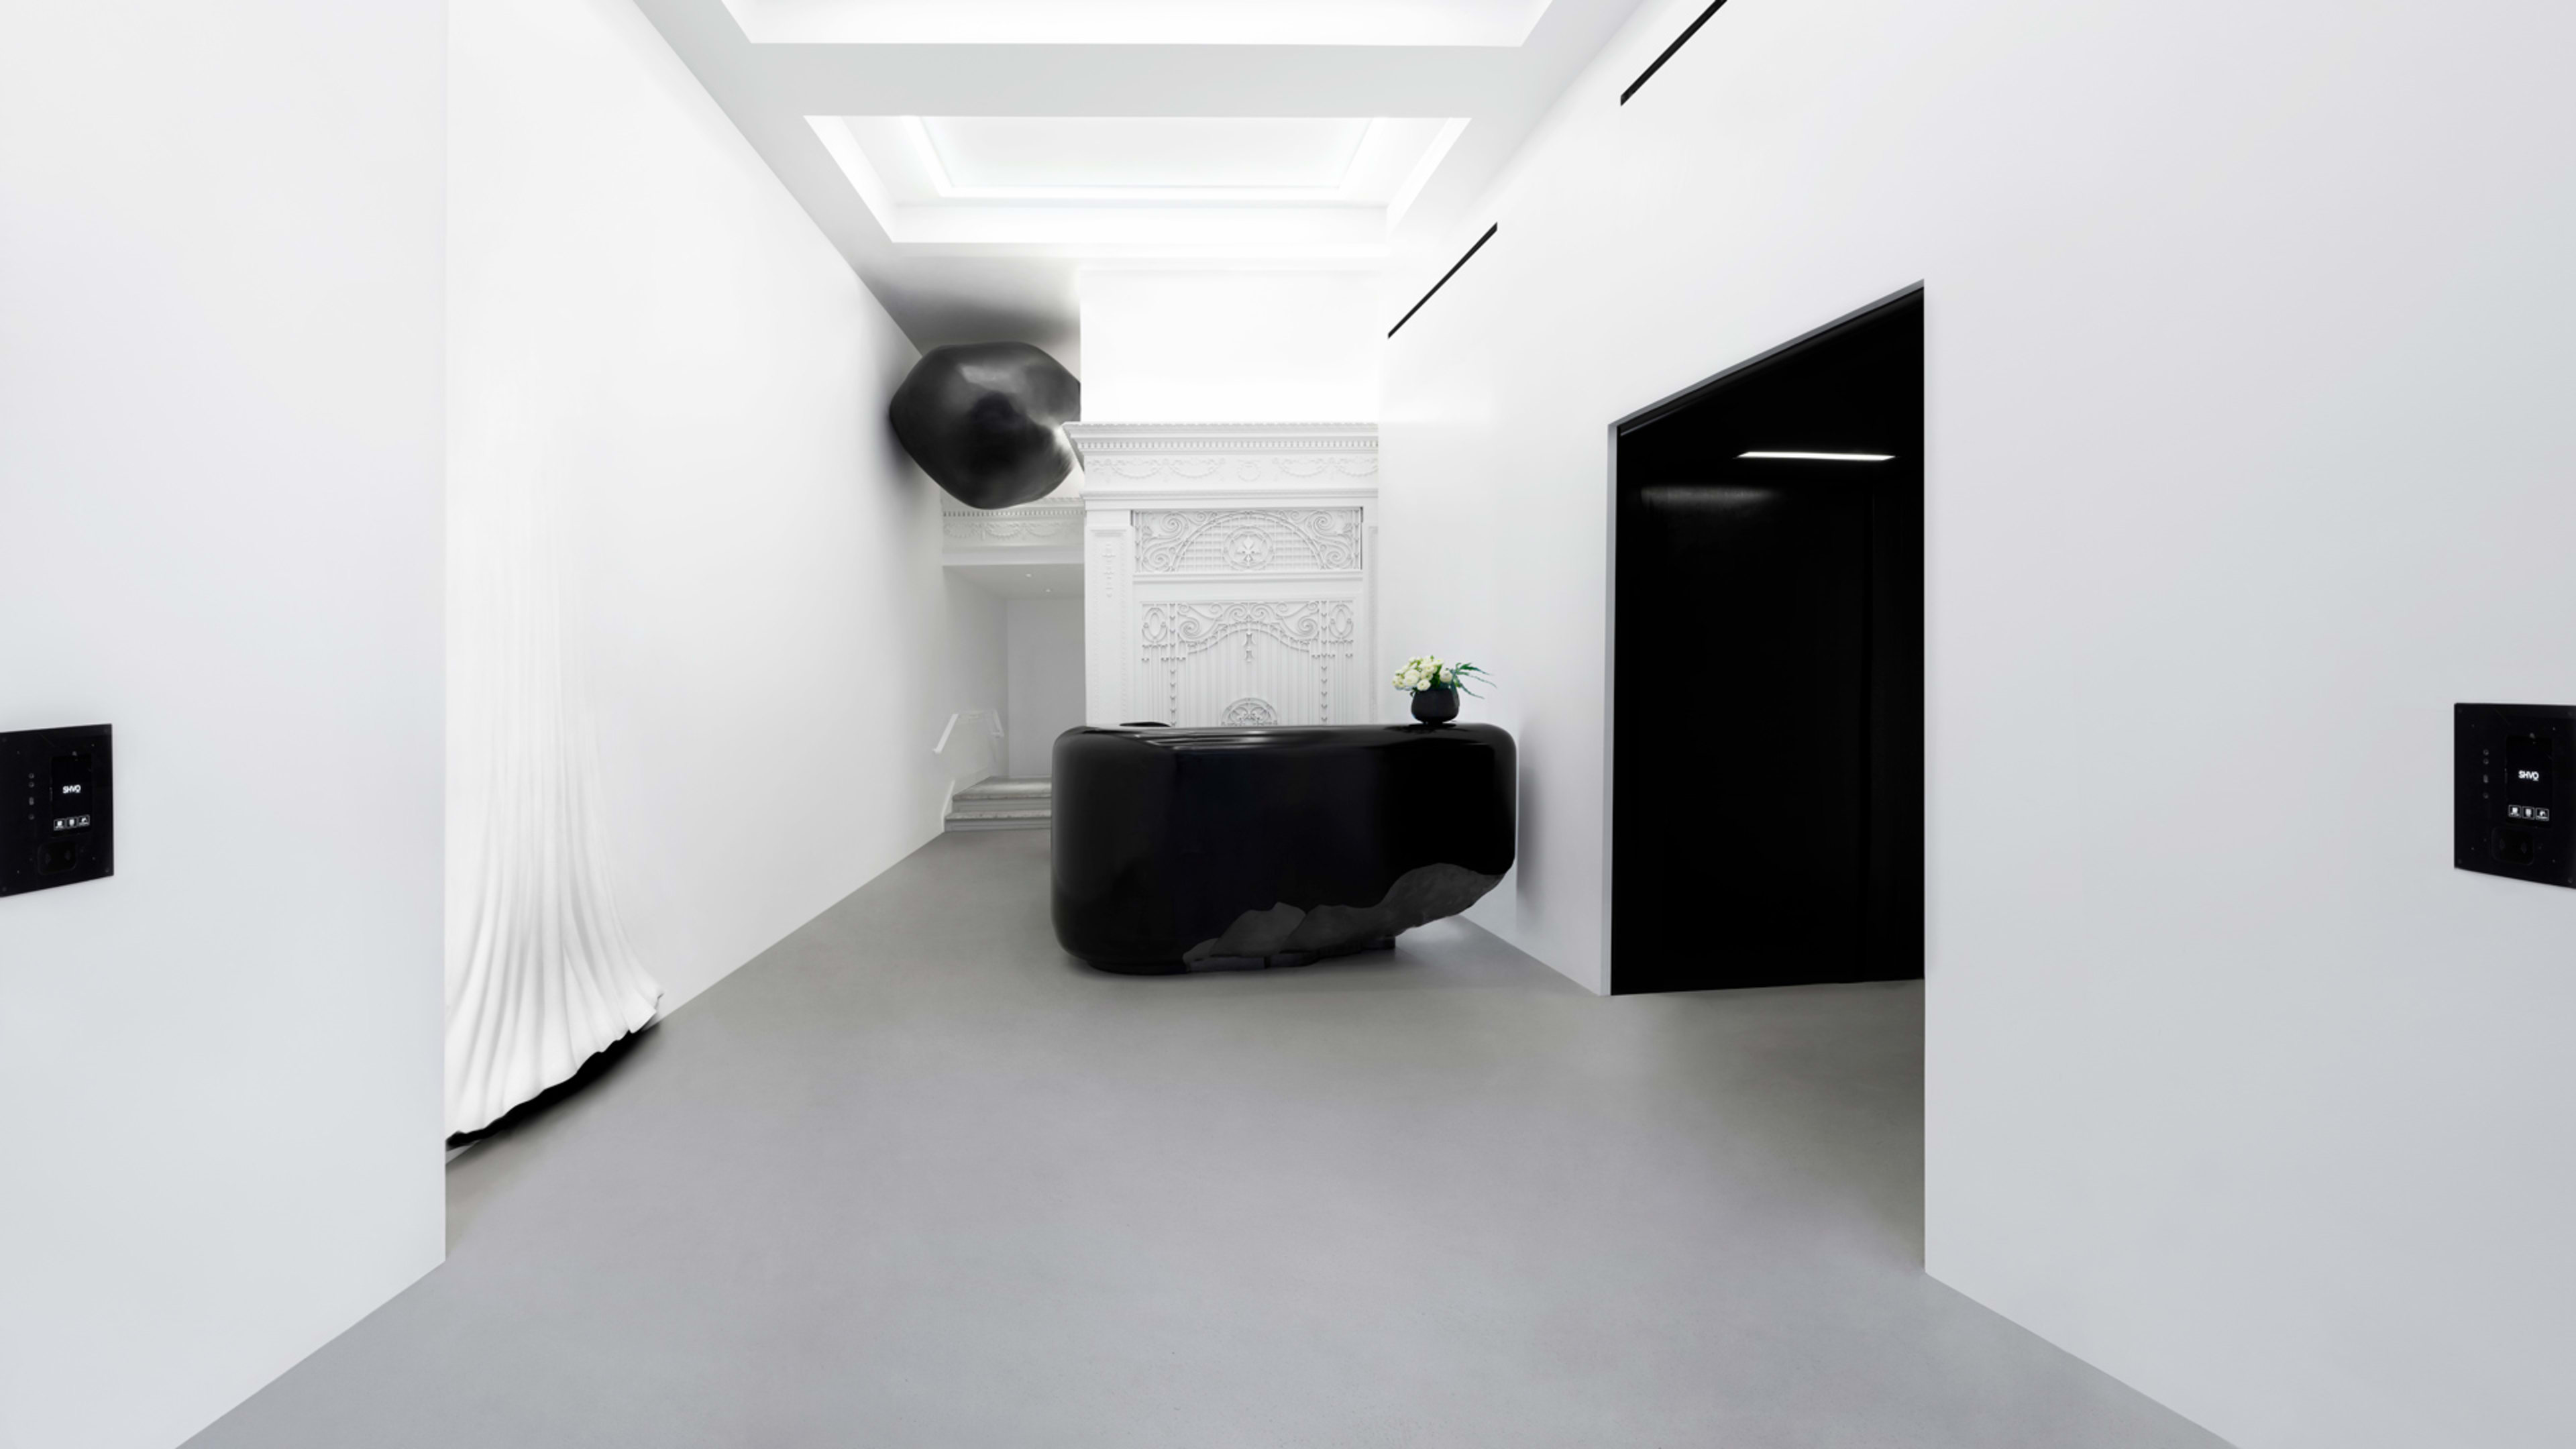 Why Snarkitecture designed its first office to look like an art gallery